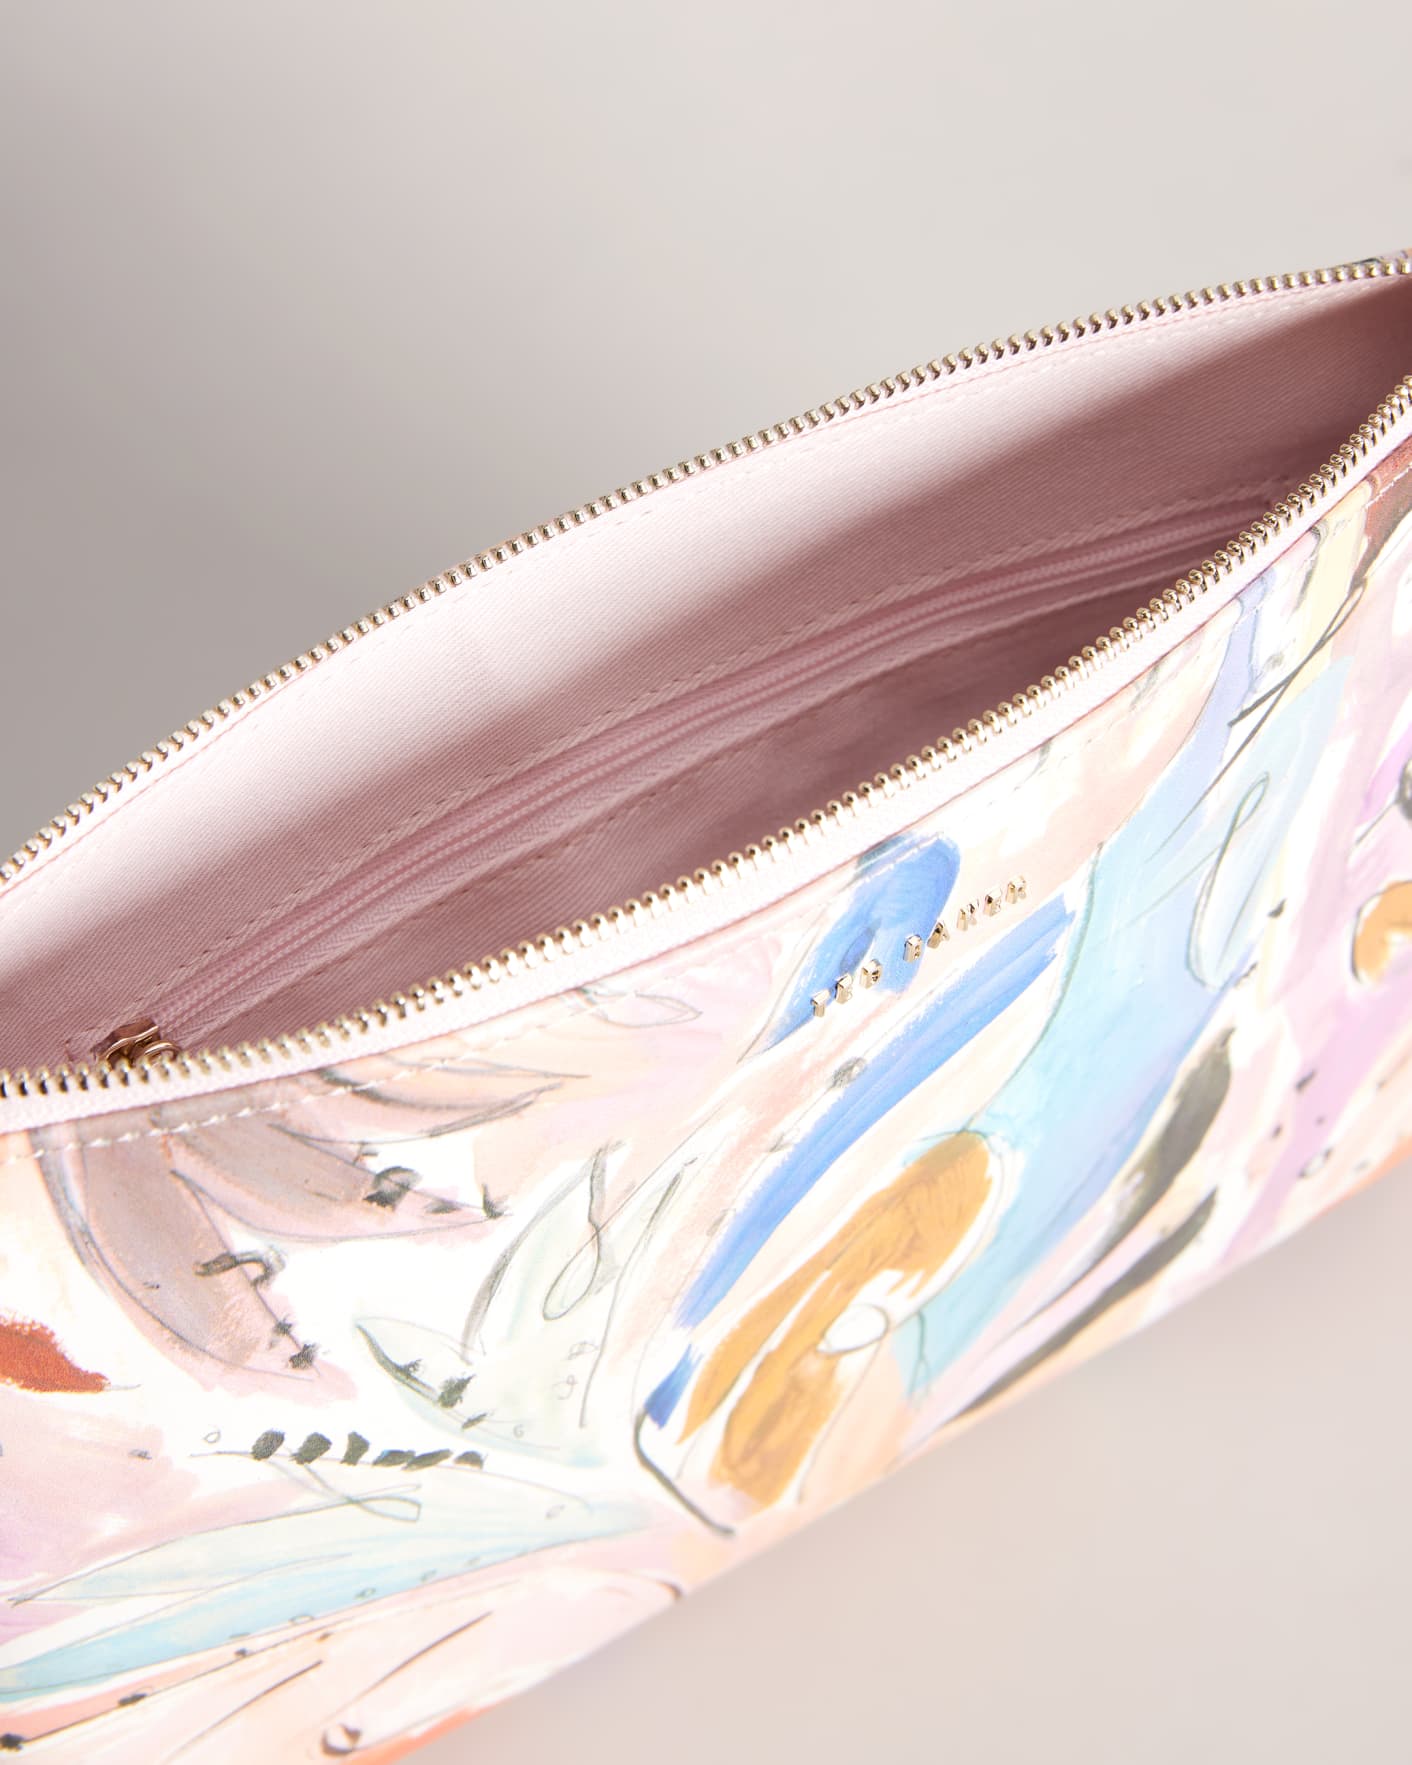 Pale Pink Art Print Leather Pouch Ted Baker